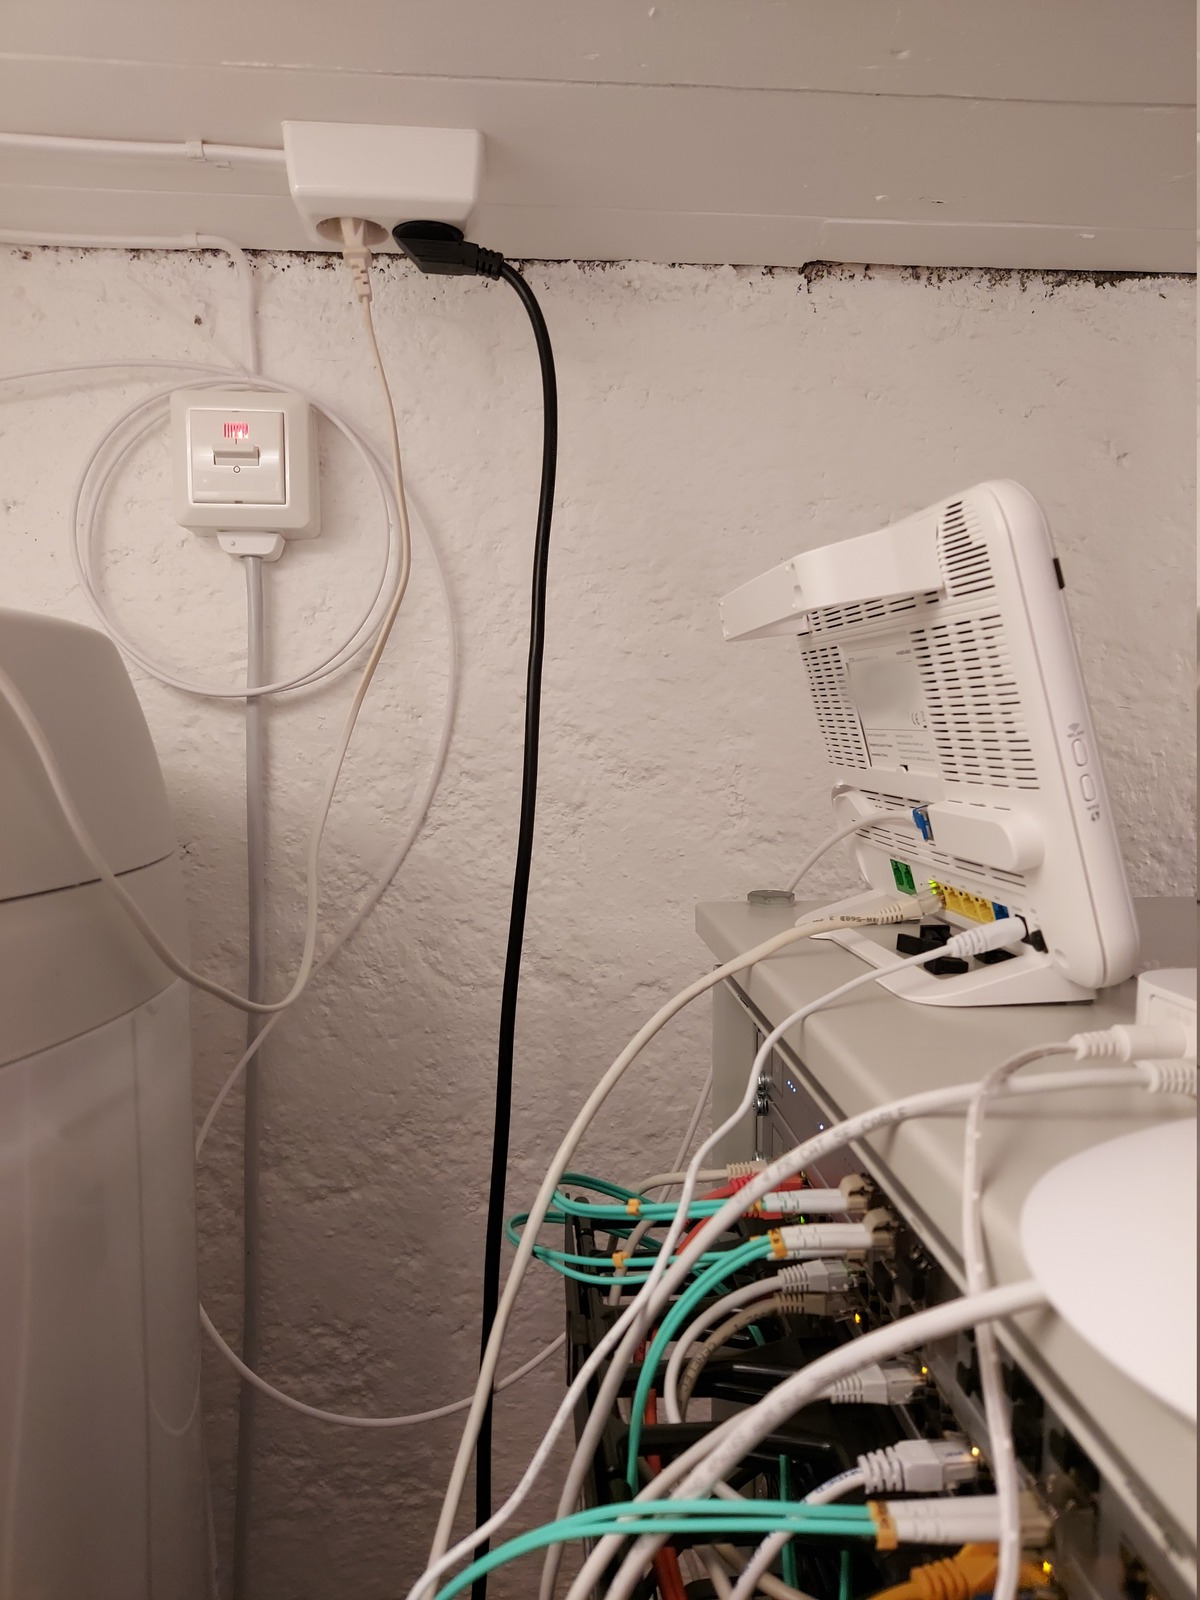 Fiber in the patch panel :: Cavelab blog — Stories from the Cavelab